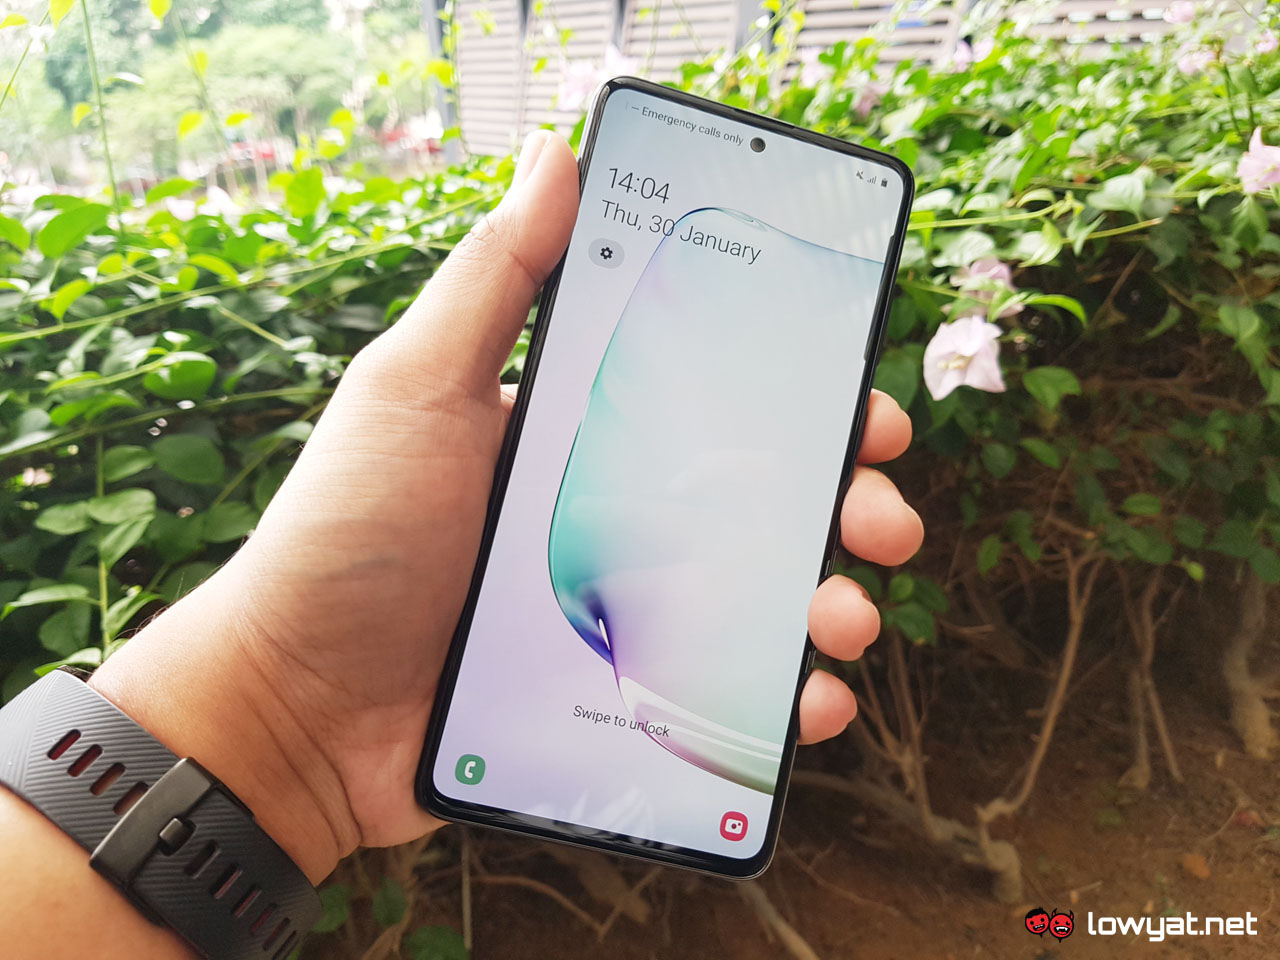 Samsung Galaxy Note 10 Lite specifications